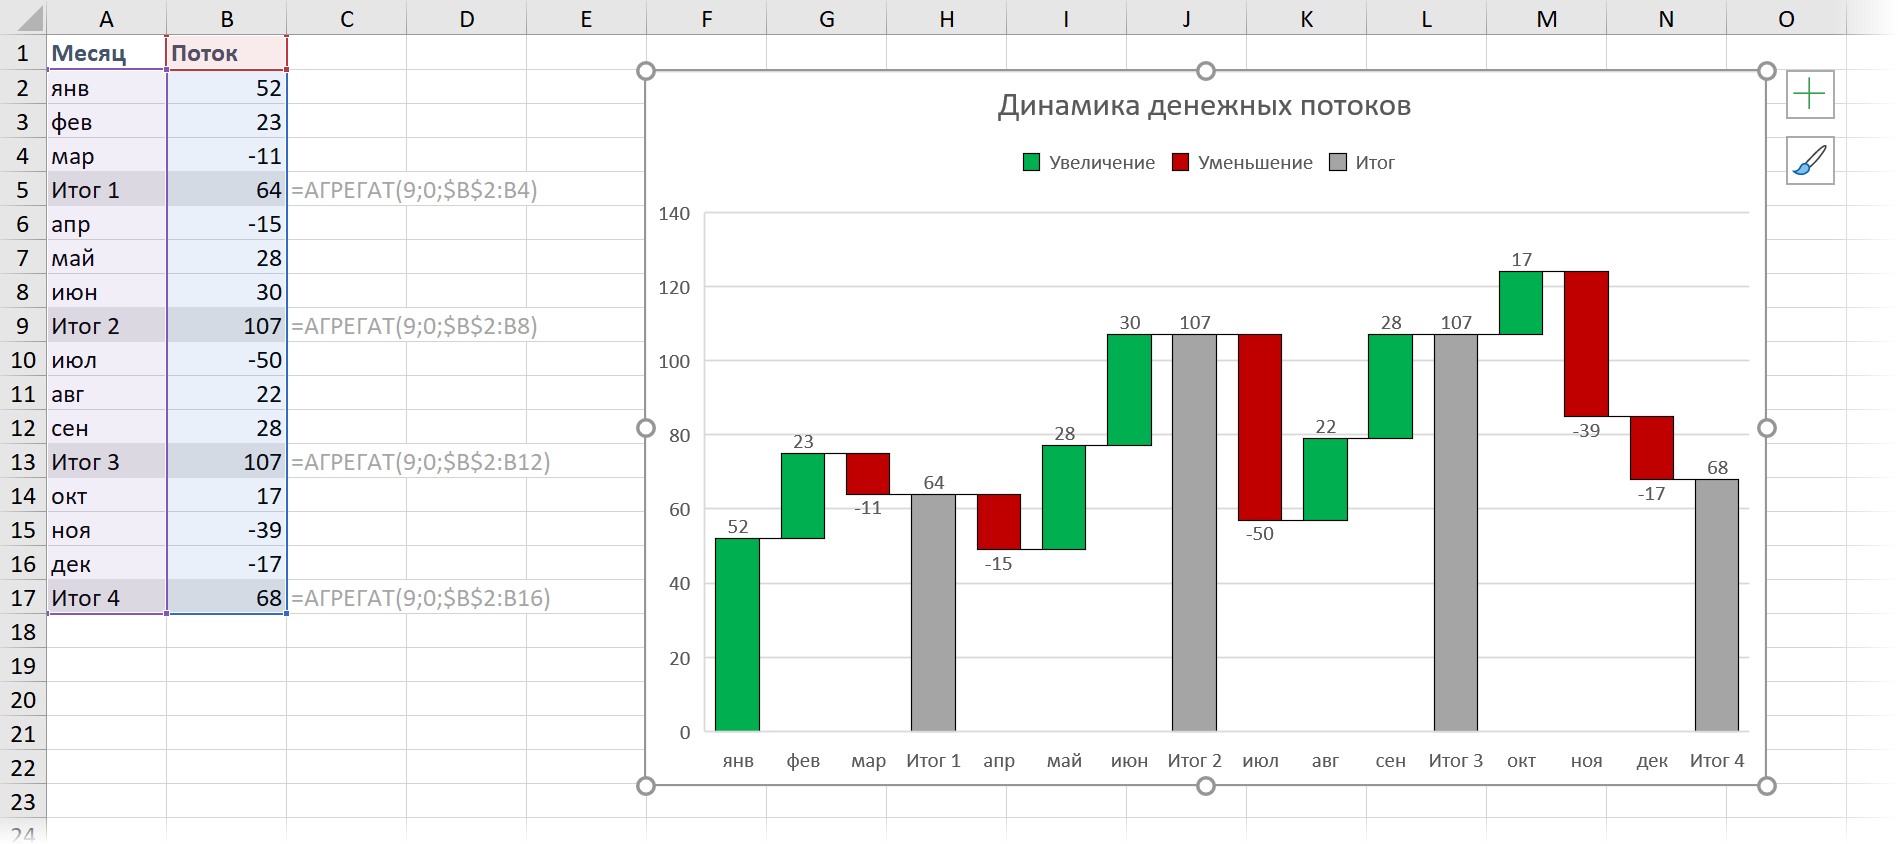 How to build a waterfall chart